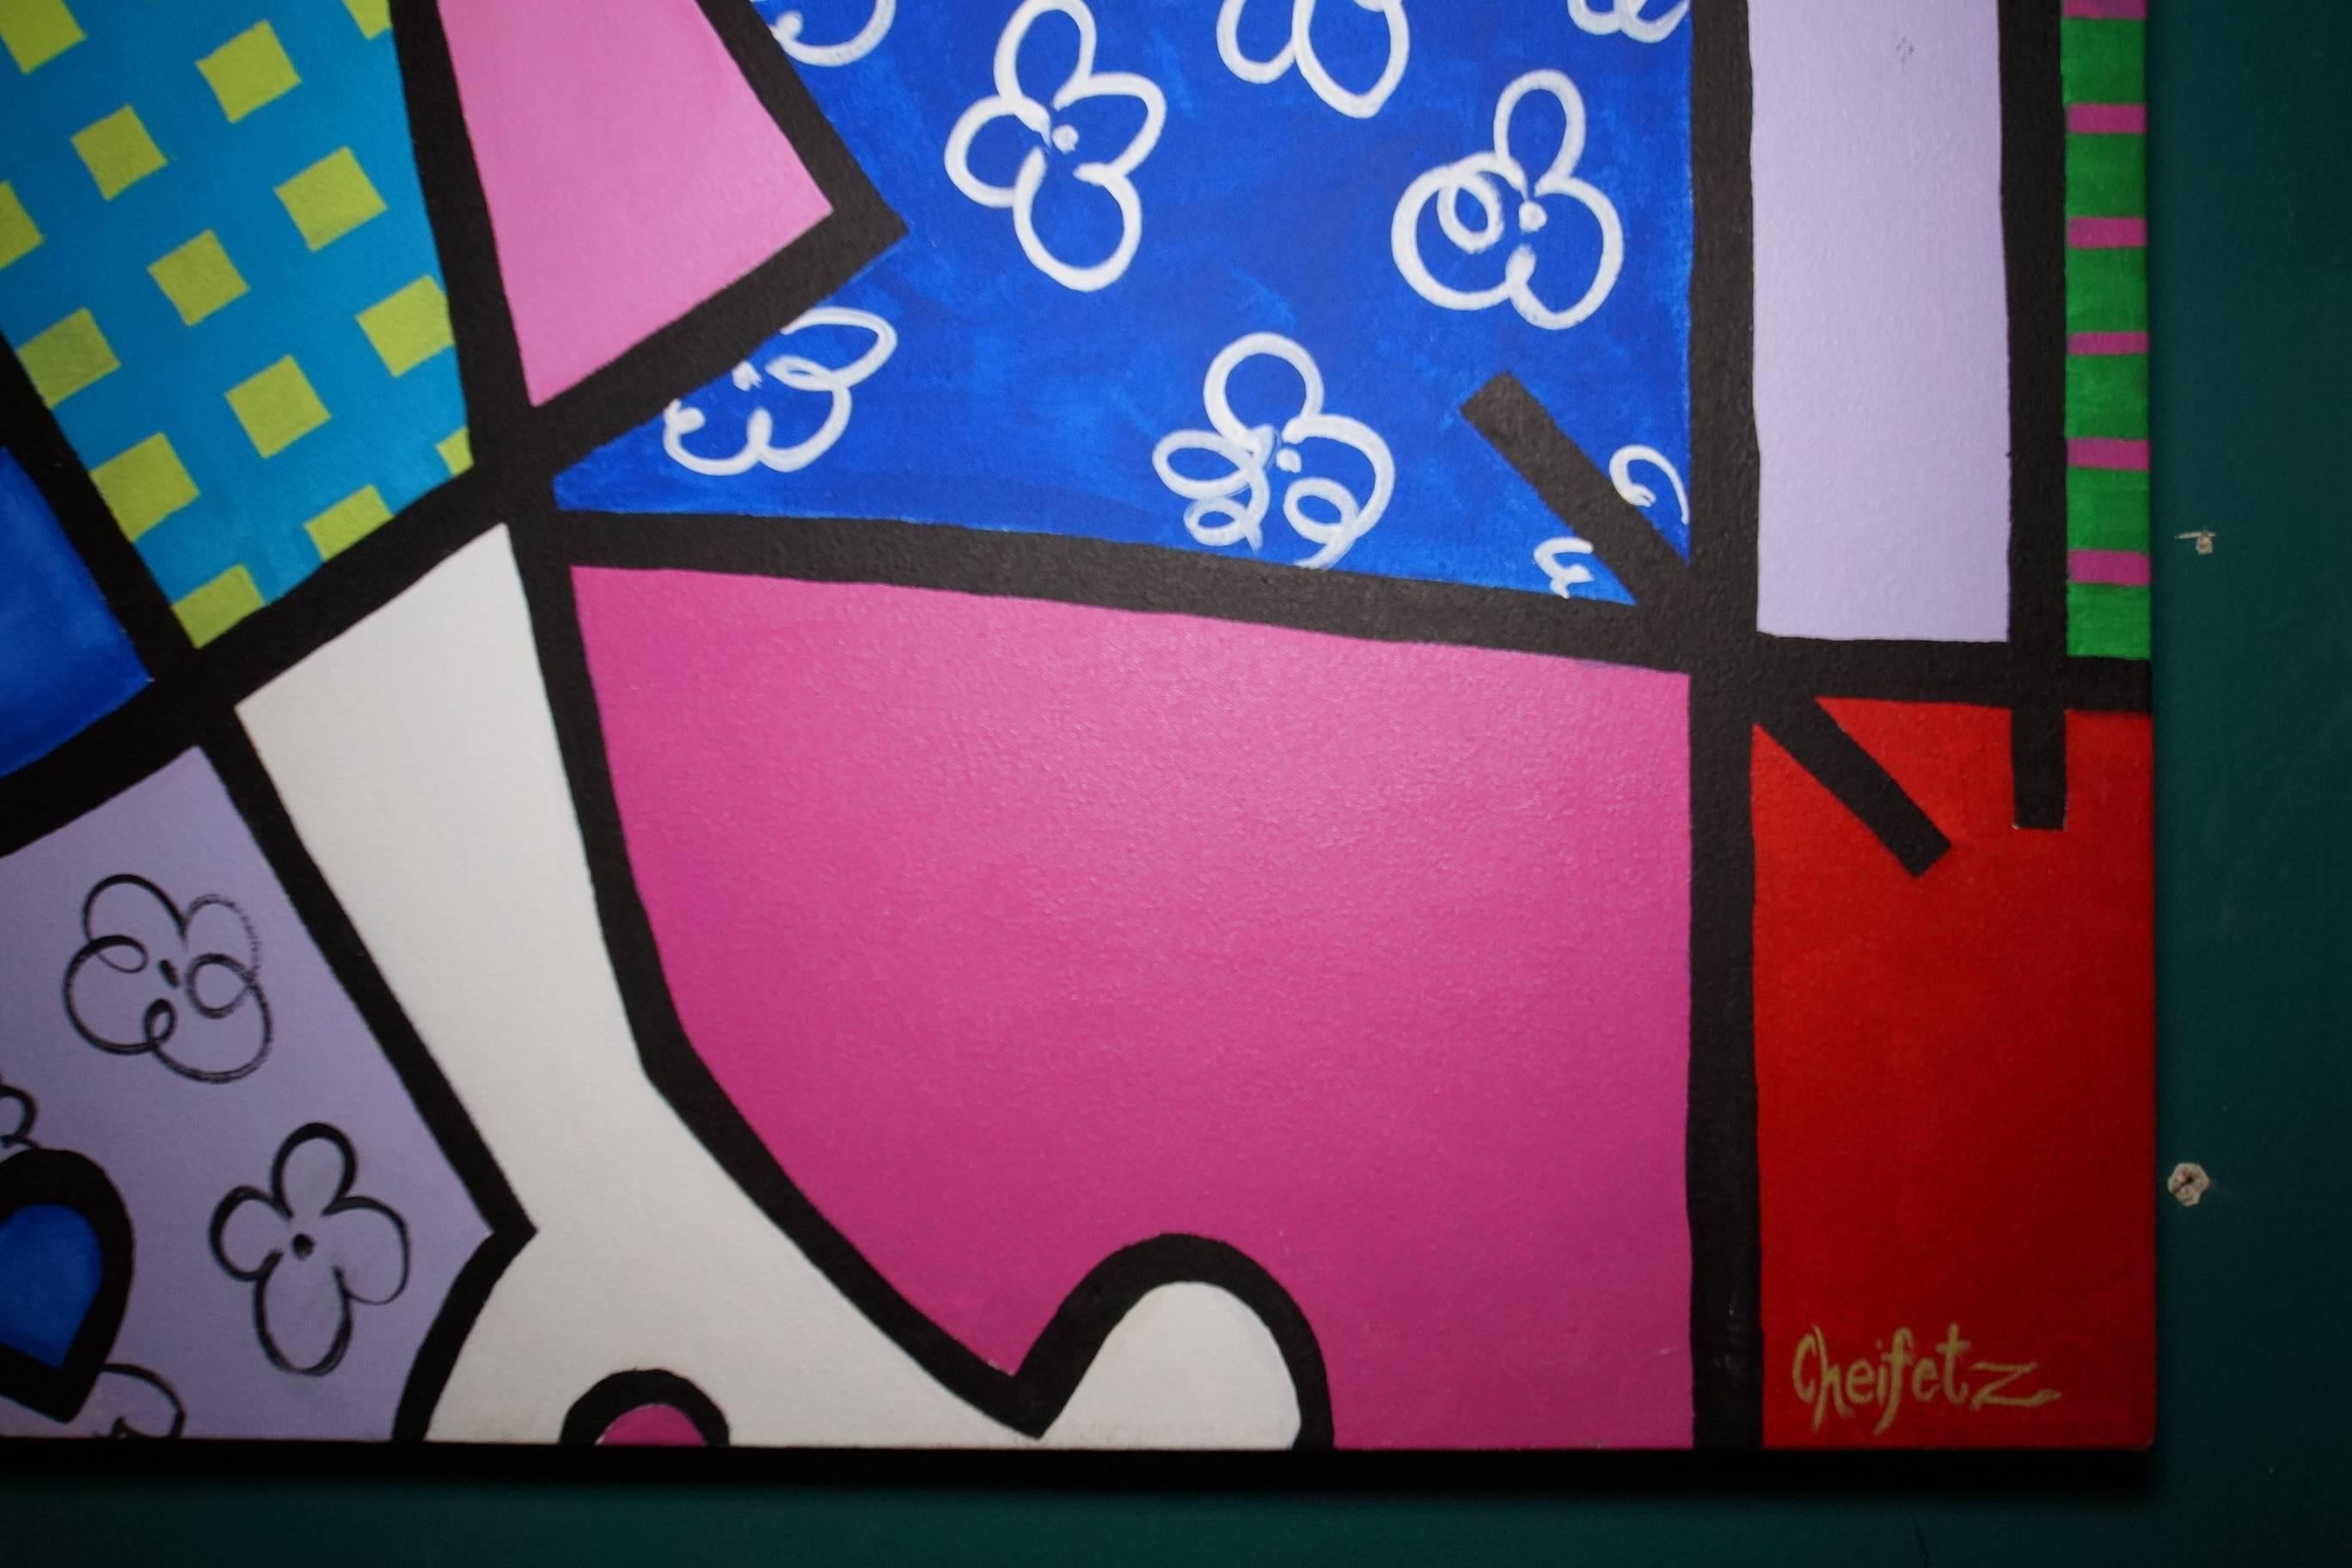 North American Cheifetz Oil on Canvas Painting in Manner of Romero Britto For Sale